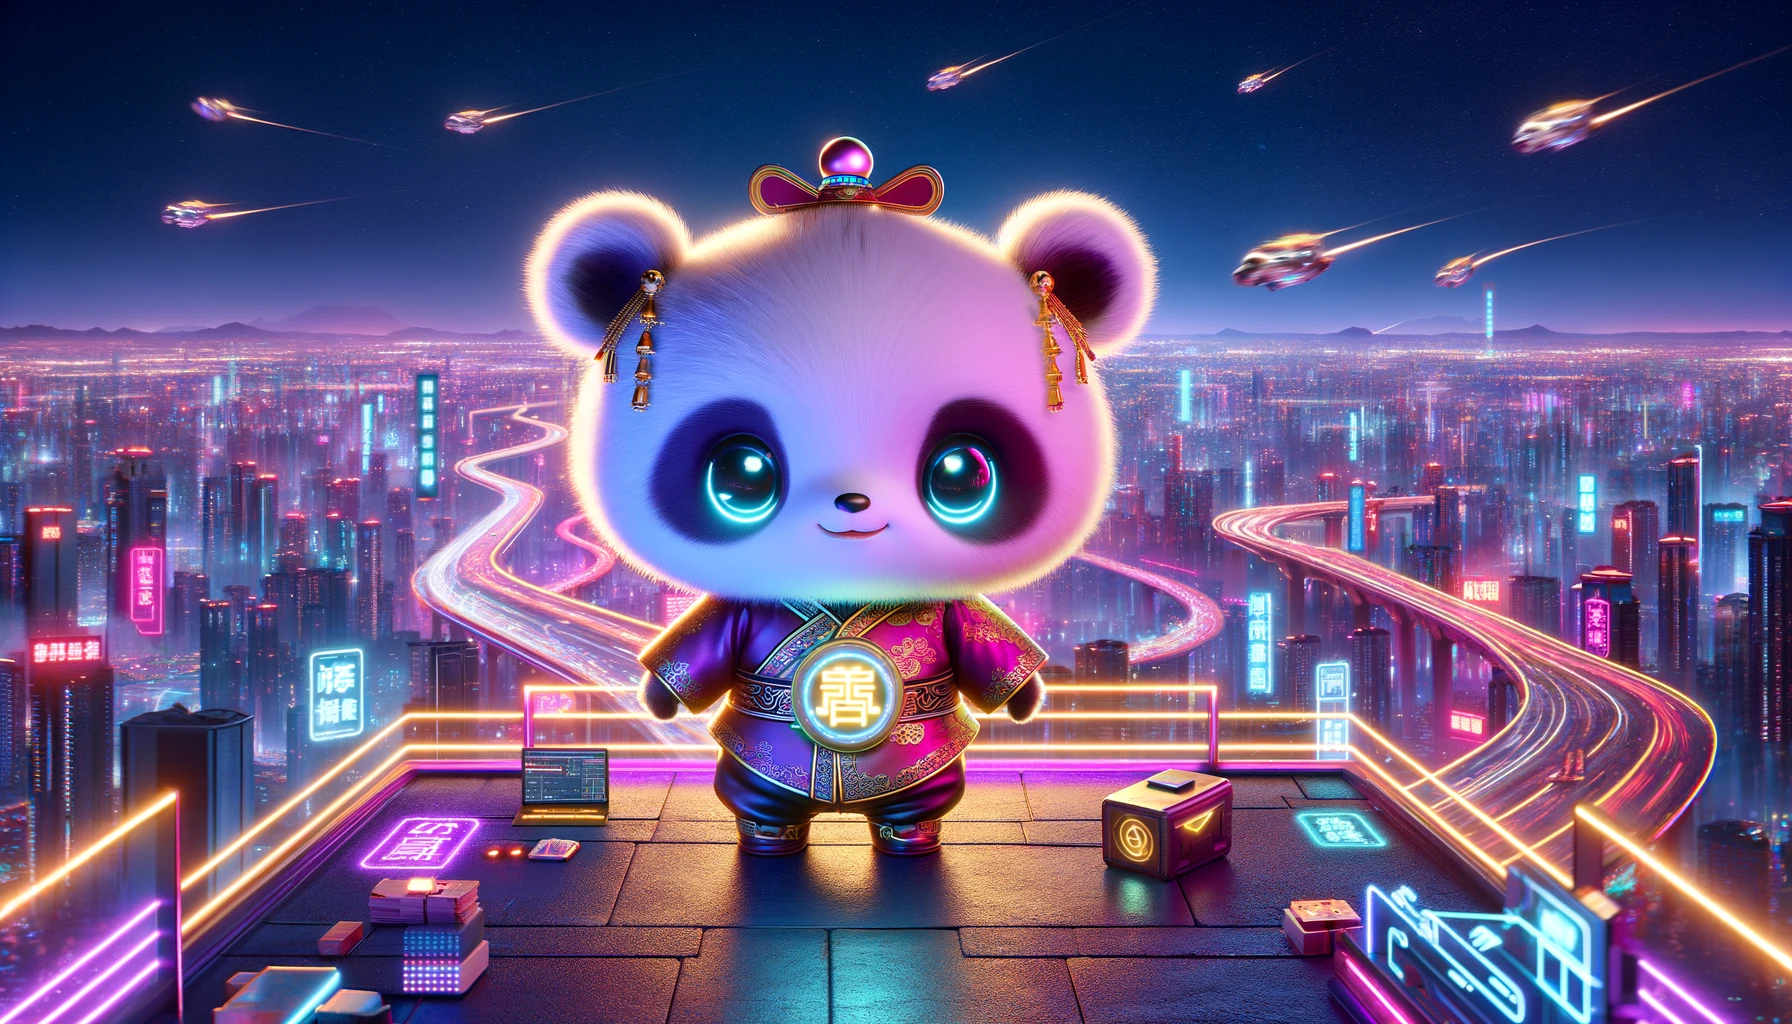 A futuristic and imaginative scene depicting the future of a cute baby Jiangshi. The baby Jiangshi is shown as a young adult, wearing a high-tech version of traditional Chinese attire, infused with neon lights and futuristic elements. It stands confidently on a rooftop overlooking a sprawling neon-lit cityscape at night, with flying vehicles zooming past. The Jiangshi's eyes glow softly, and it holds a digital version of the traditional yellow talisman, which now acts as a holographic interface. This wide image captures a blend of ancient tradition and modern technology, showcasing a visionary future.